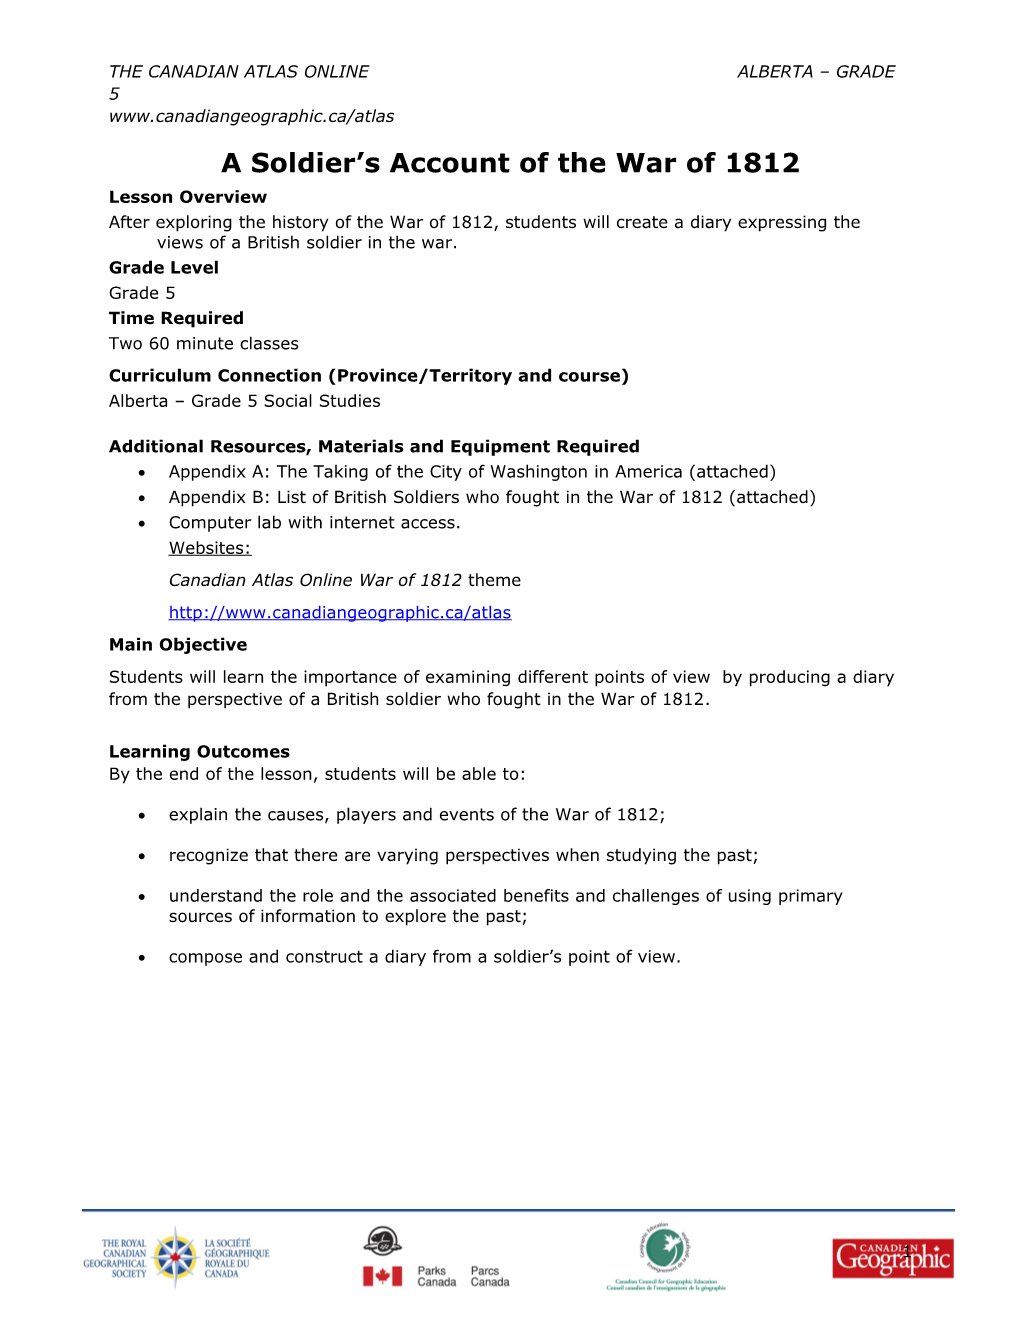 A Soldier S Account of the War of 1812